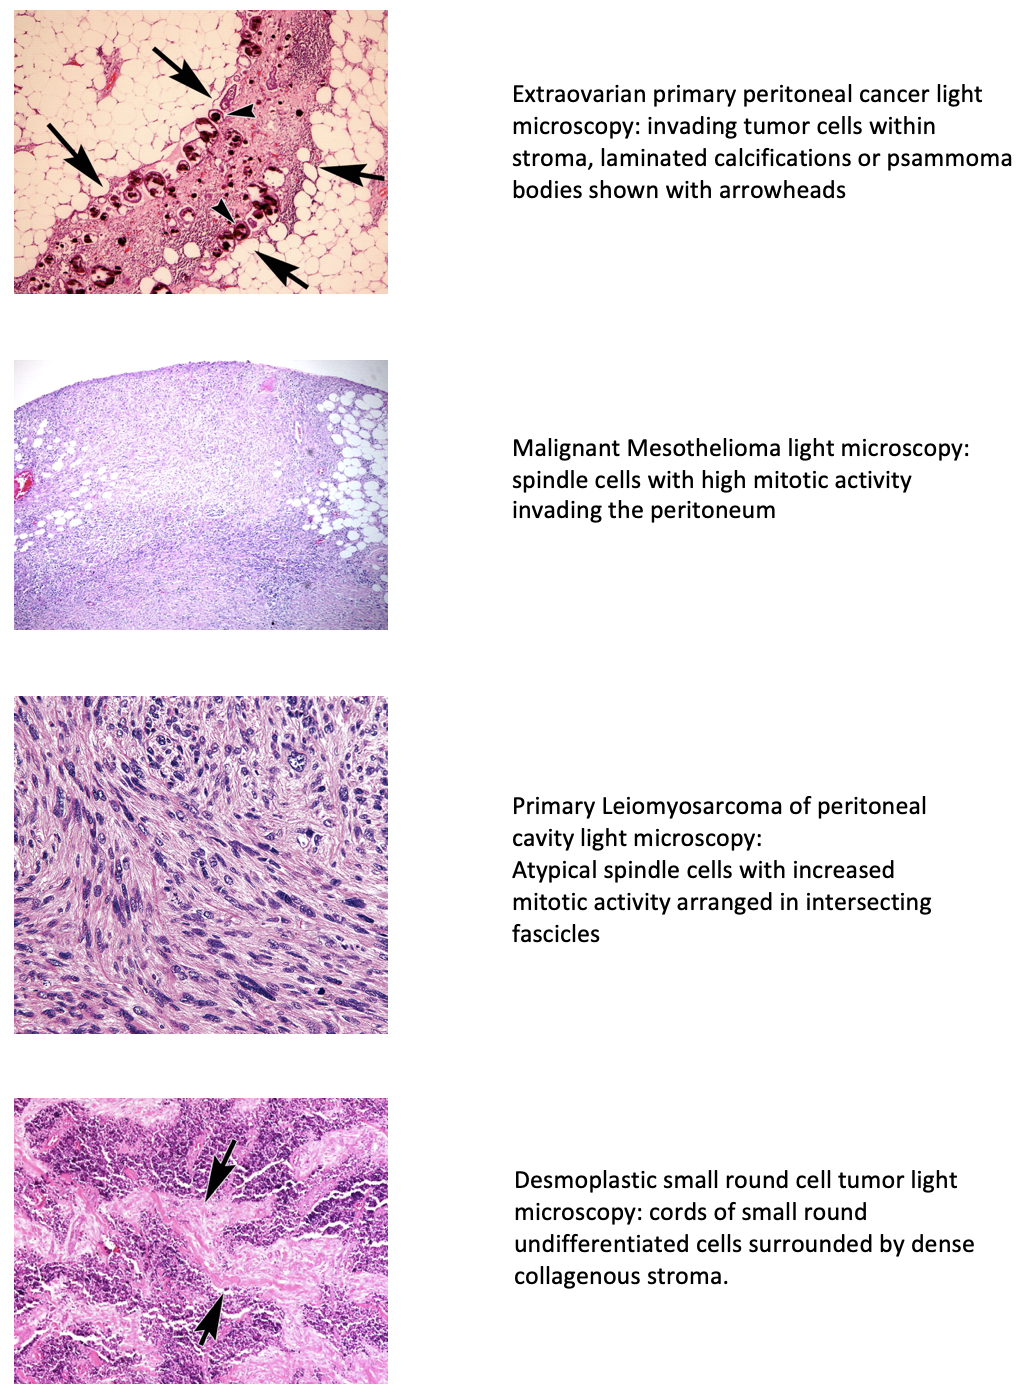 PMID 18349460  and 28287938 Light Microscopic features of different types of Peritoneal Cancer.